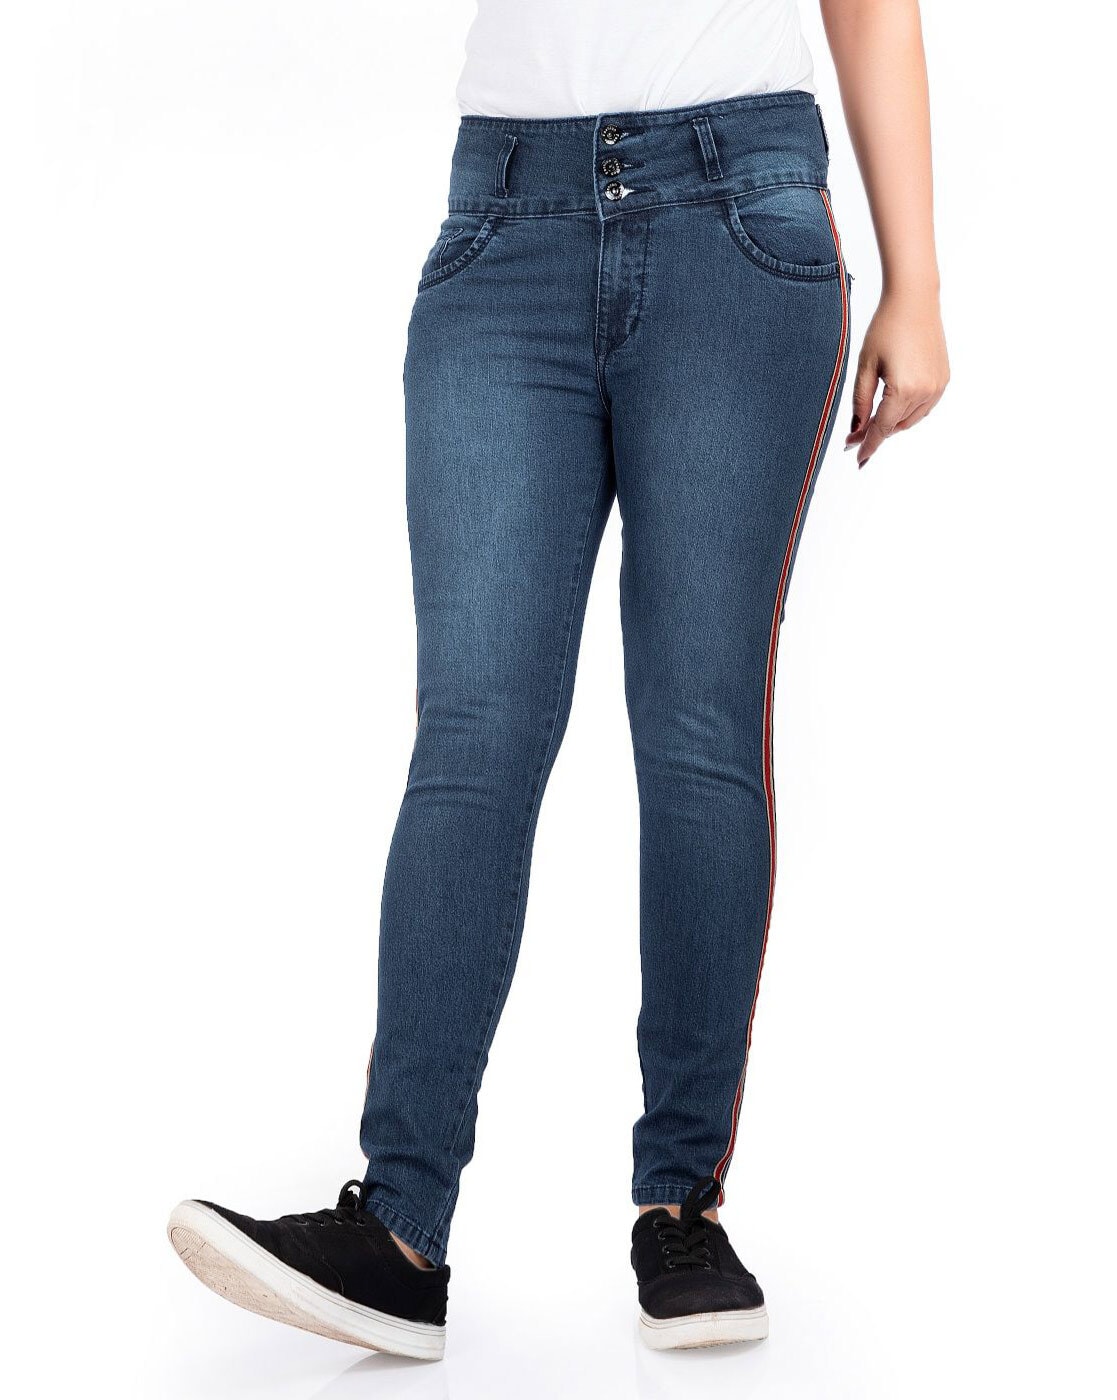 Rea-lize - Light Blue Cotton Women's Jeans ( Pack of 1 ) - Buy Rea-lize -  Light Blue Cotton Women's Jeans ( Pack of 1 ) Online at Best Prices in  India on Snapdeal